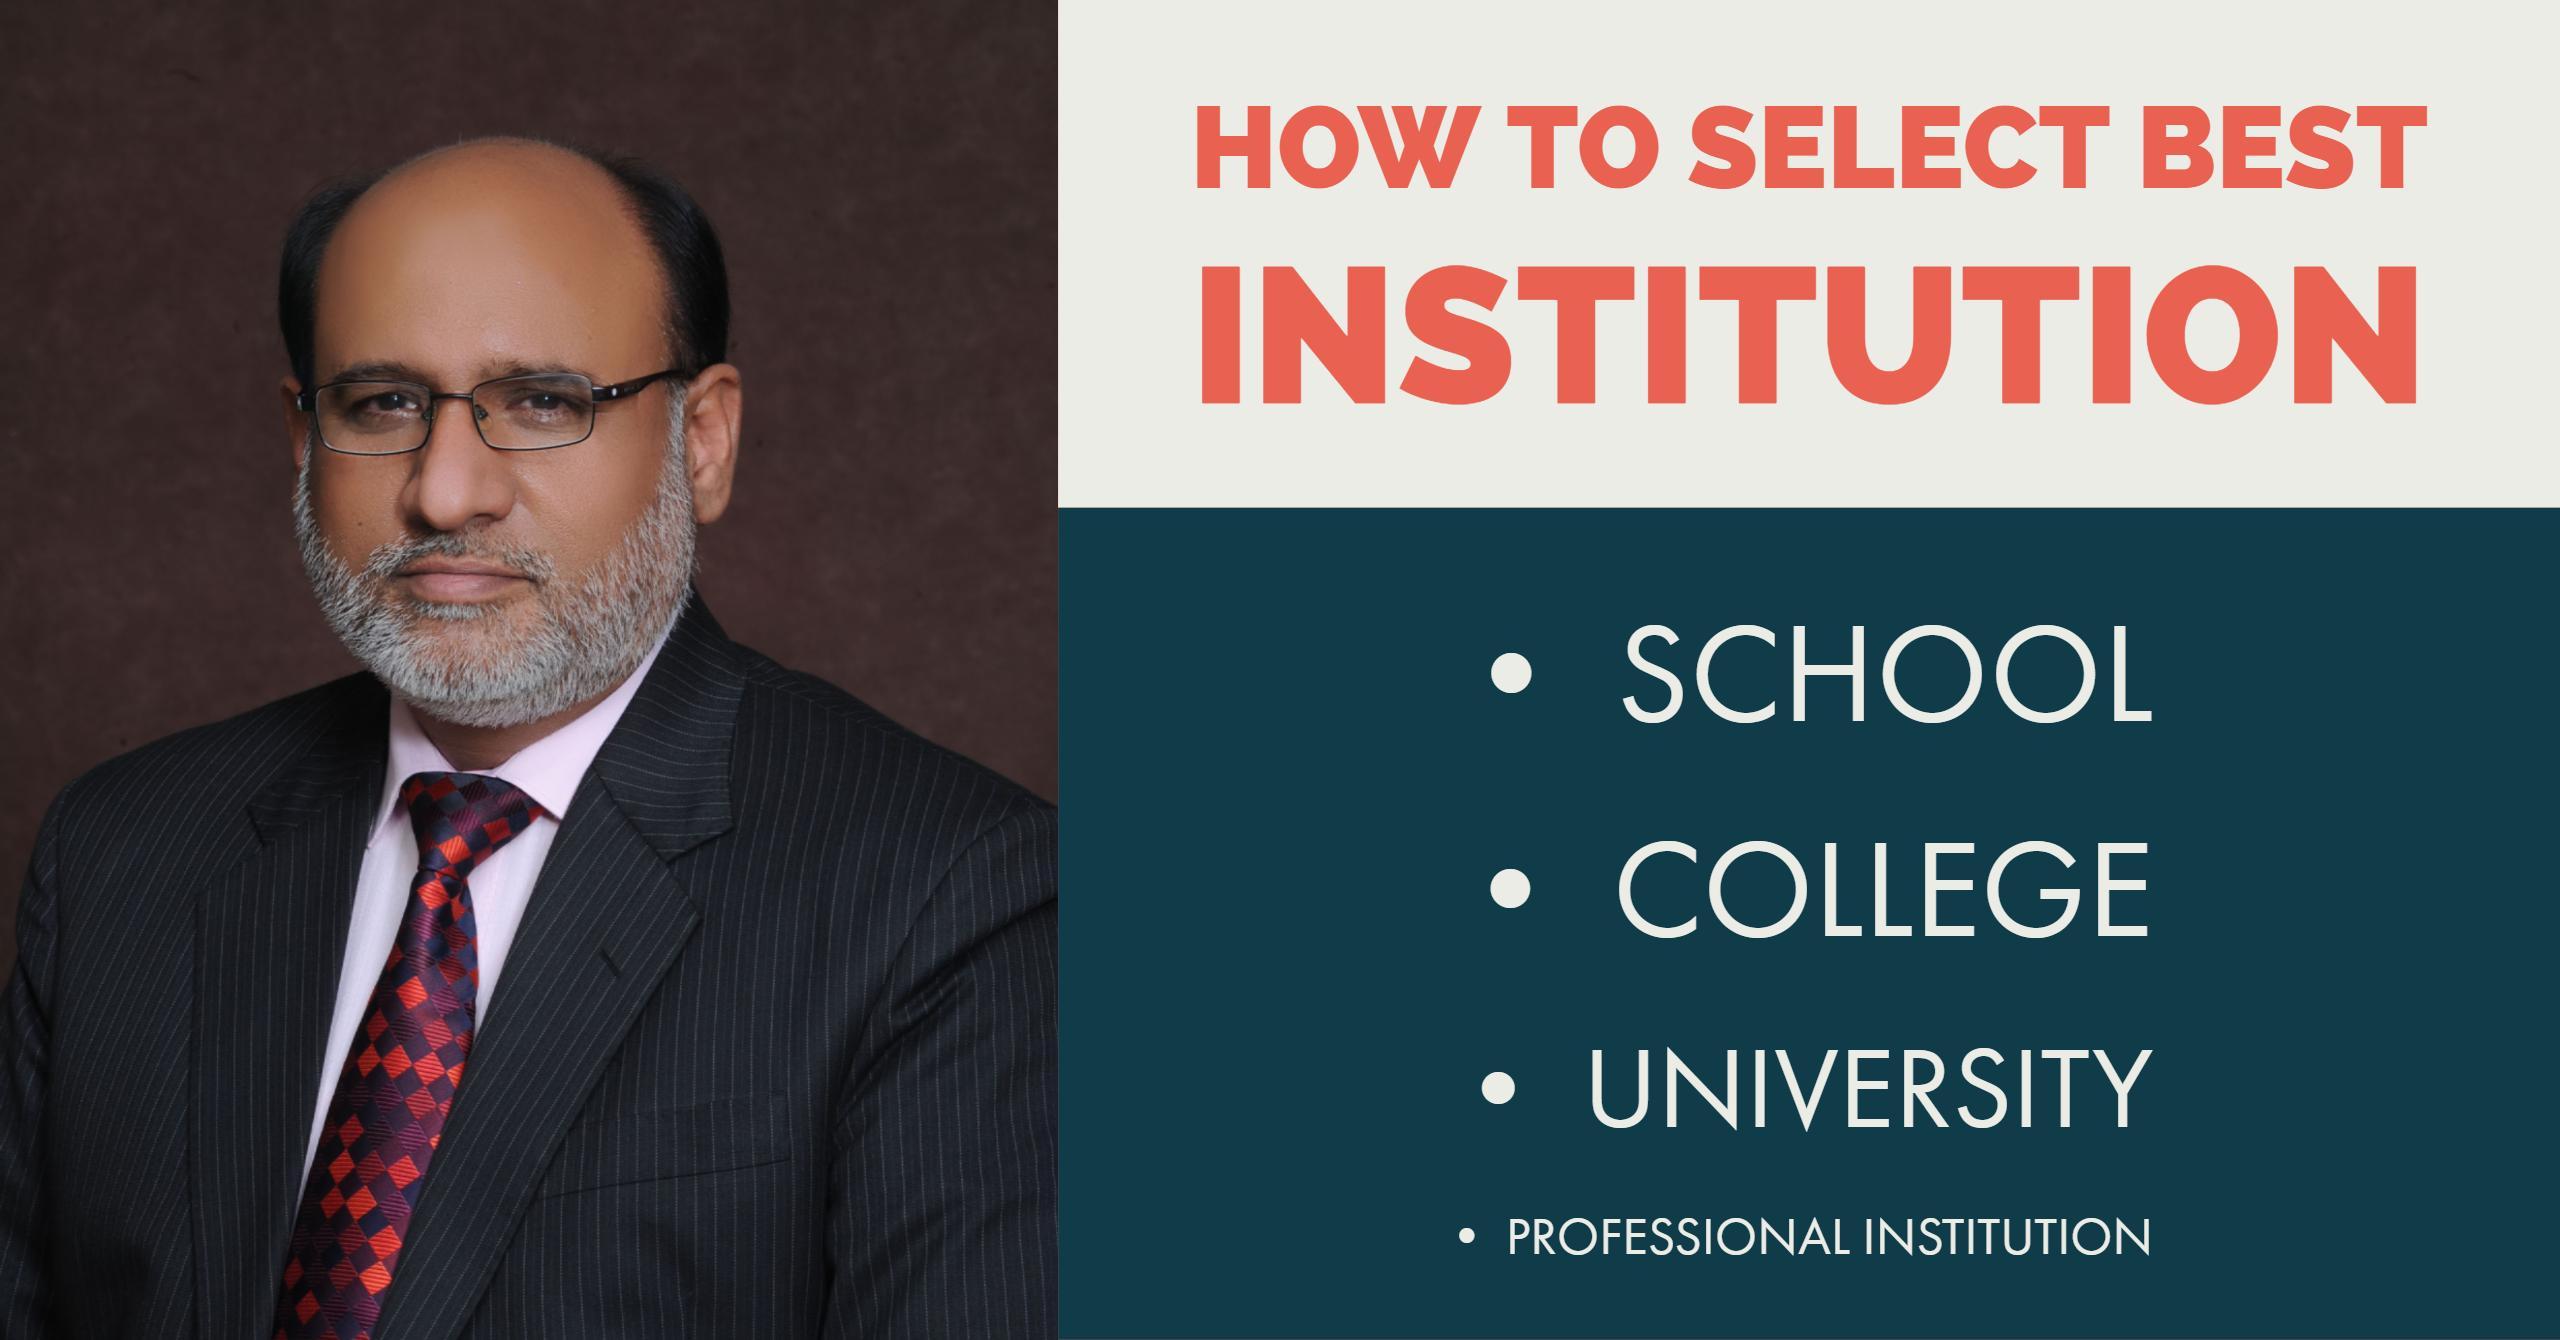 HOW TO SELECT BEST INSTITUTION